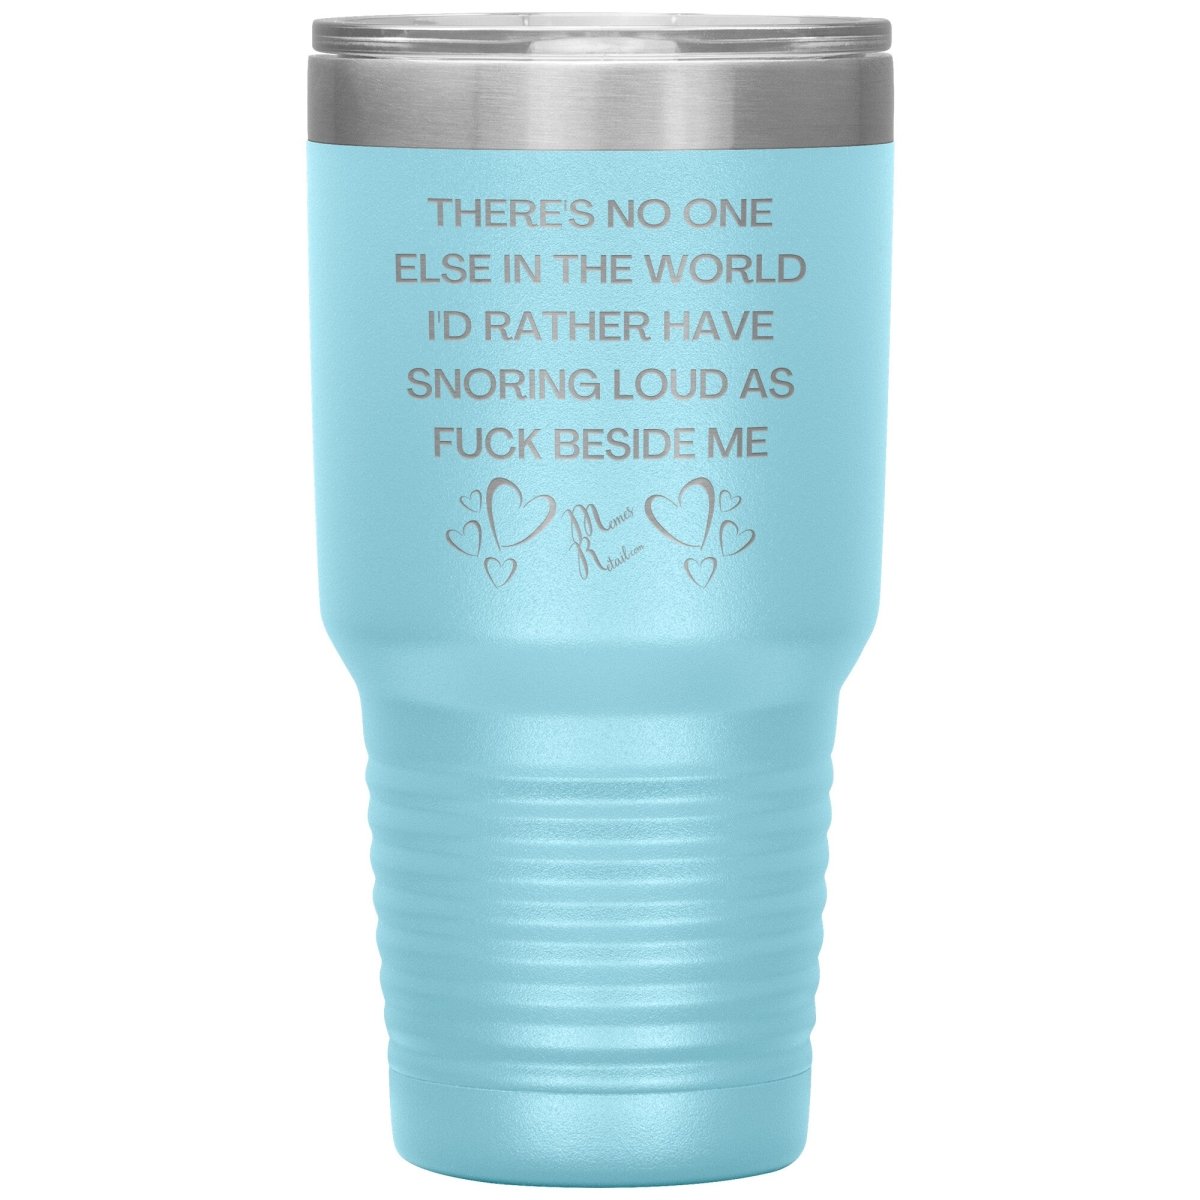 There's No One Else in the World I'd Rather Have Snoring Loud, 30oz Insulated Tumbler / Light Blue - MemesRetail.com